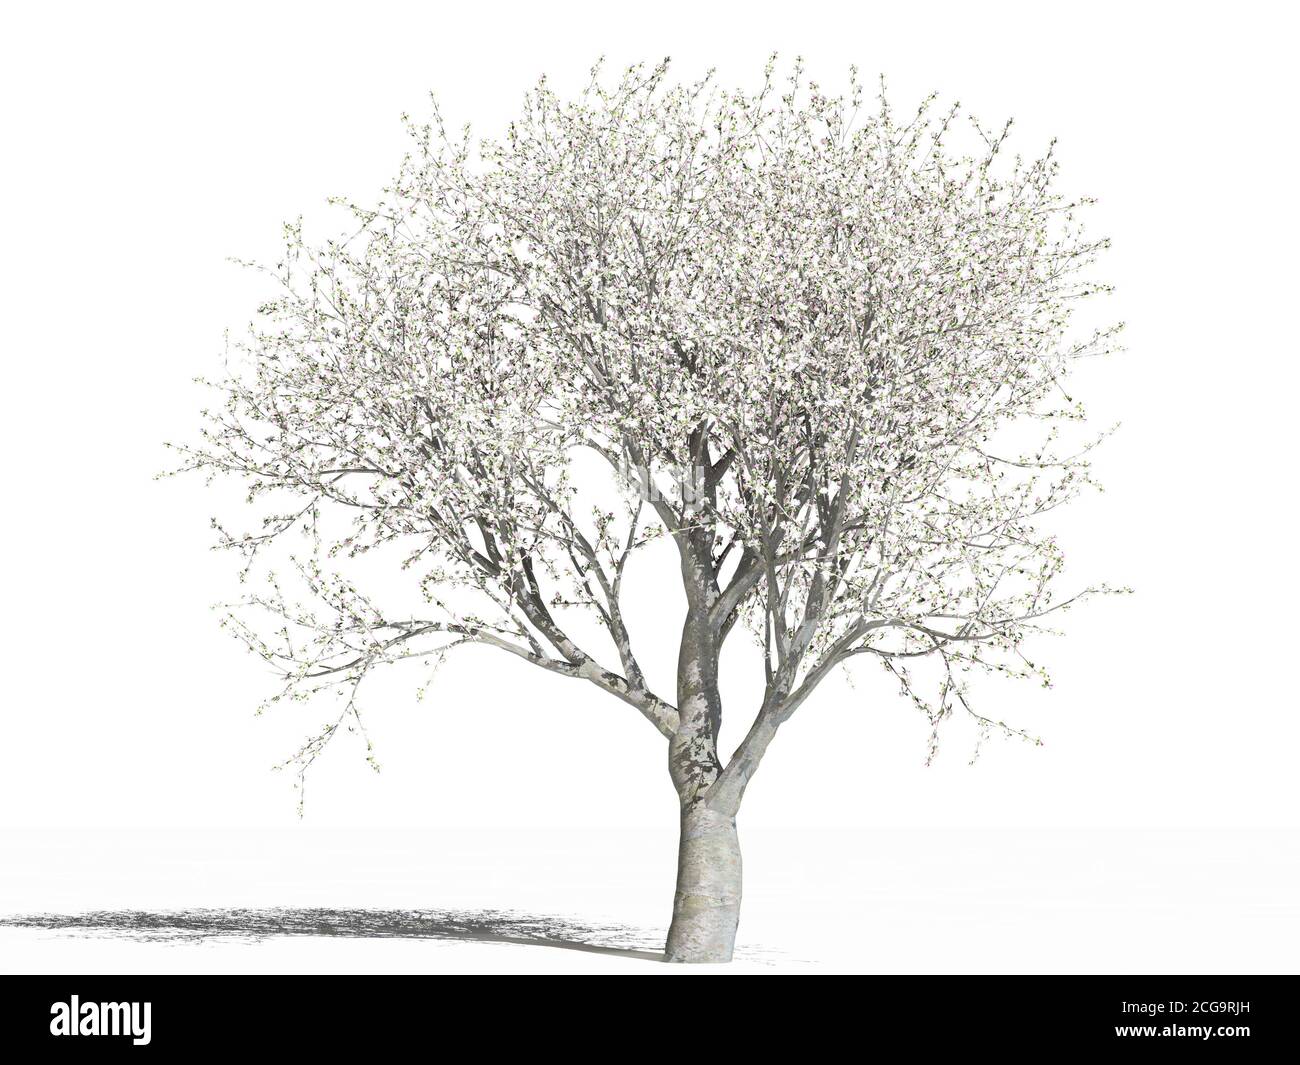 Blooming apple tree (Malus domestica). Blooming apple tree on a white surface. Isolated. 3D Illustration Stock Photo